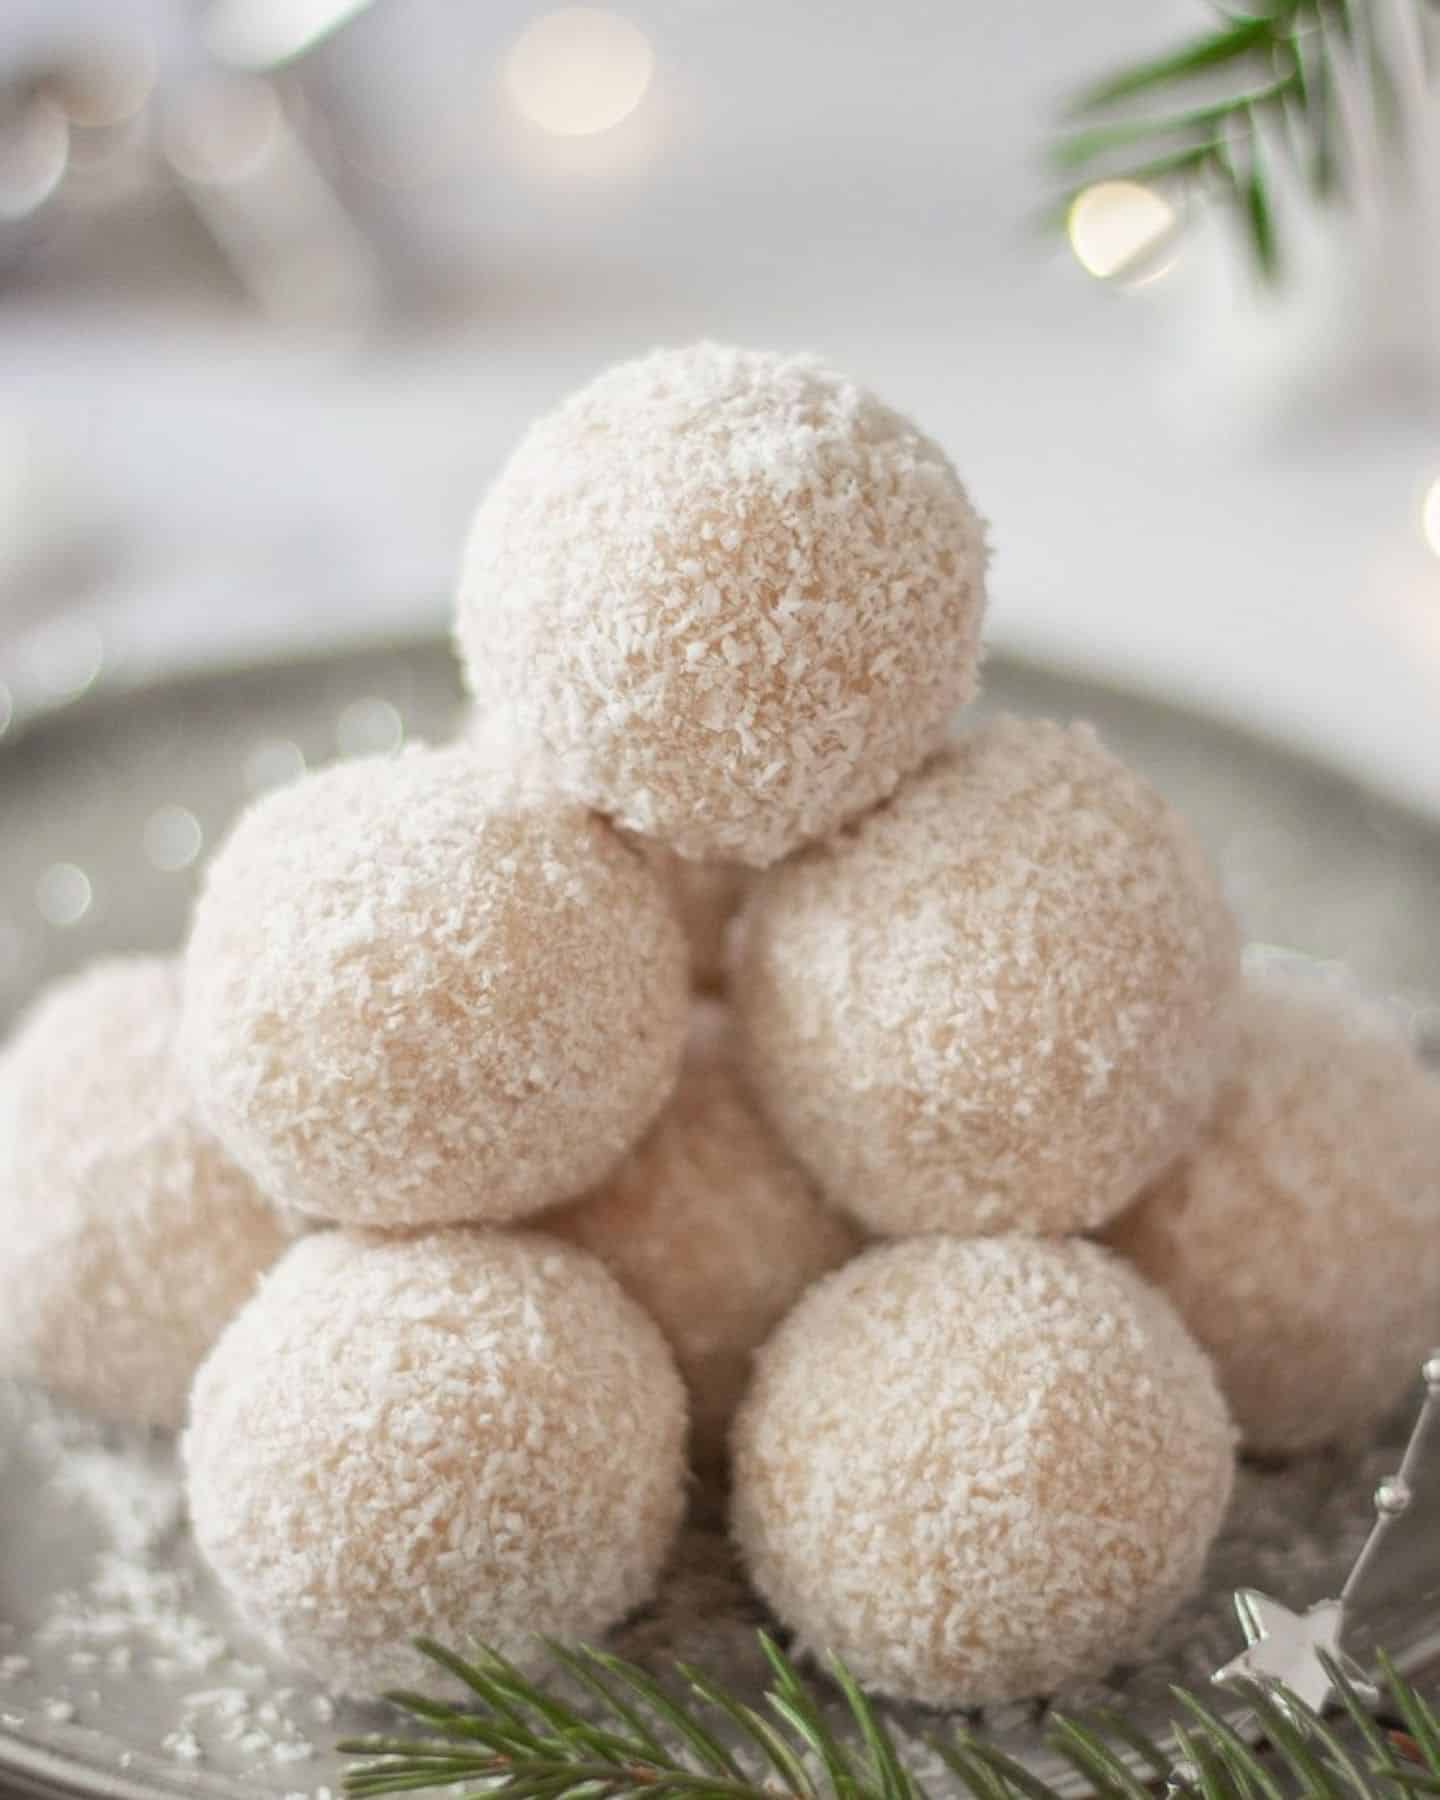 Vegan snowballs piled high with a Christmas tree branch poking in